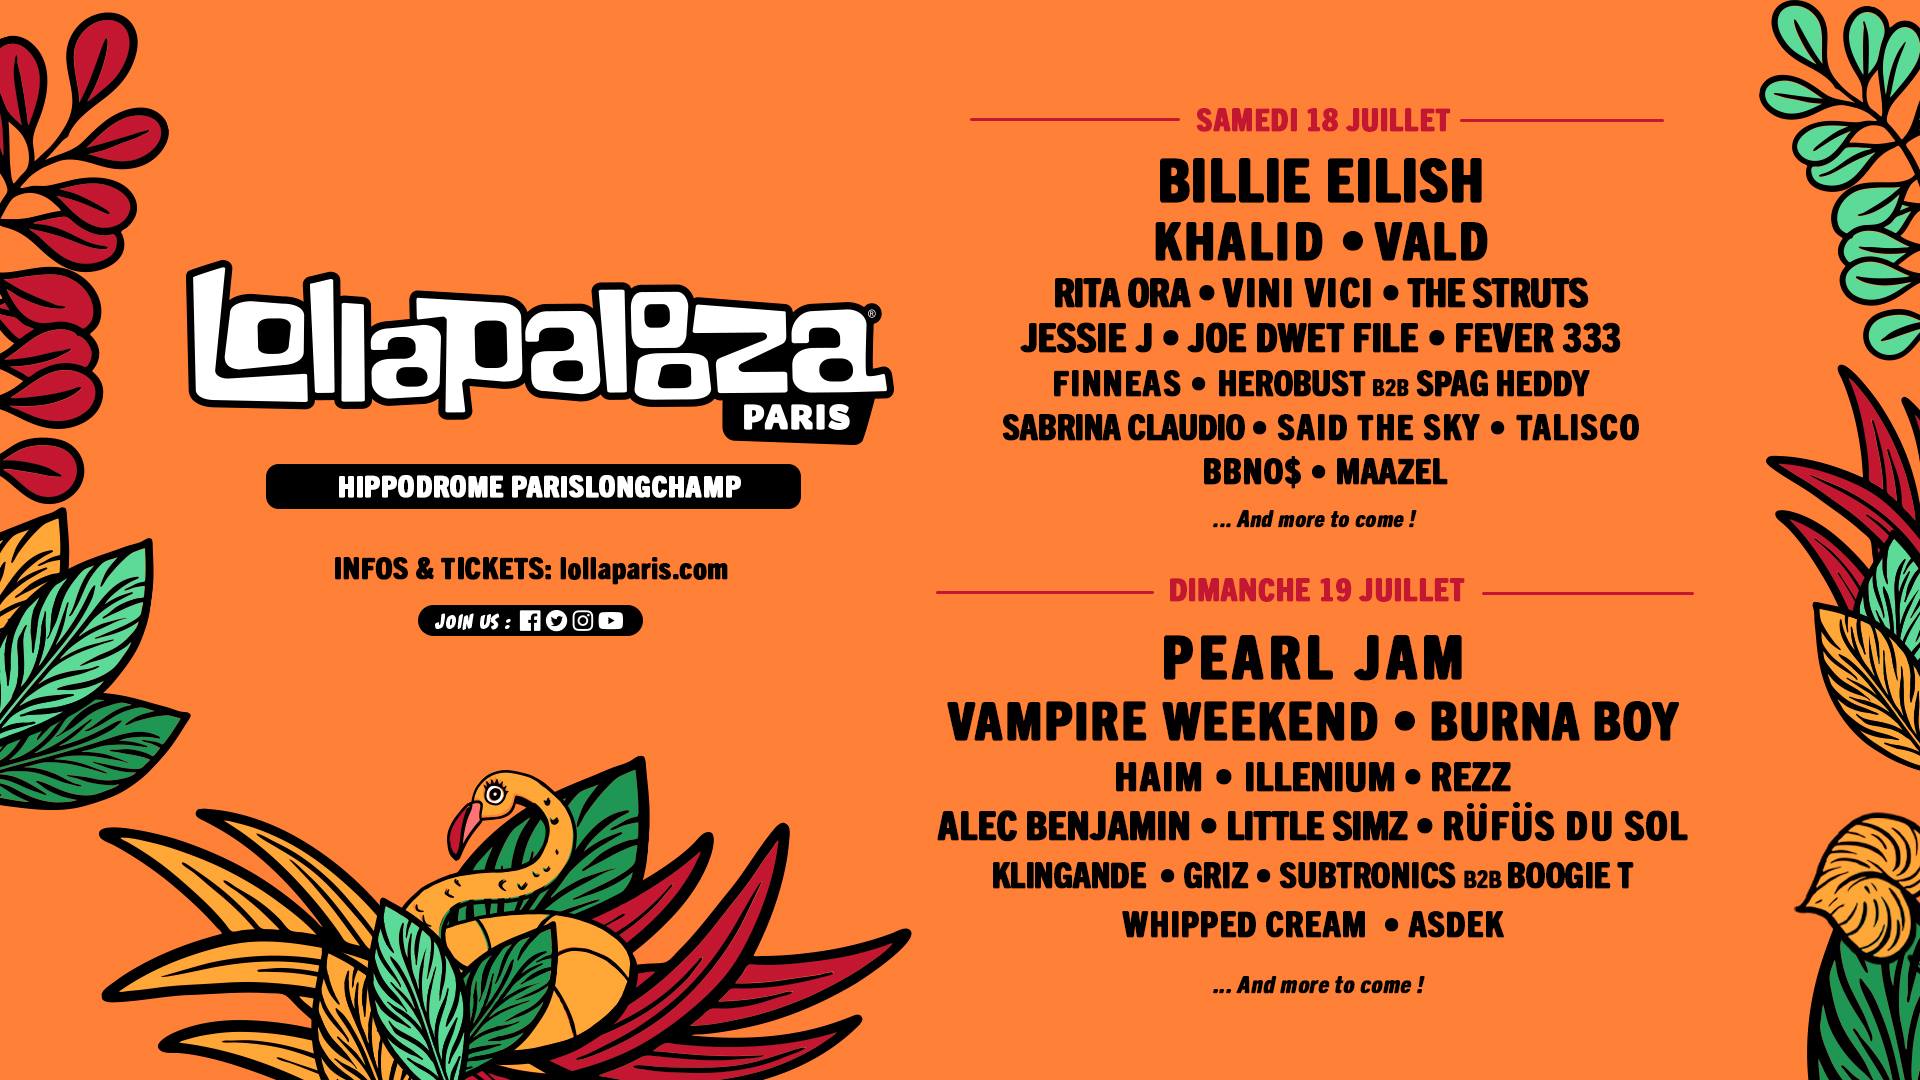 Billie Eilish, Vampire Weekend, Khalid and More Added to Lollapalooza Paris